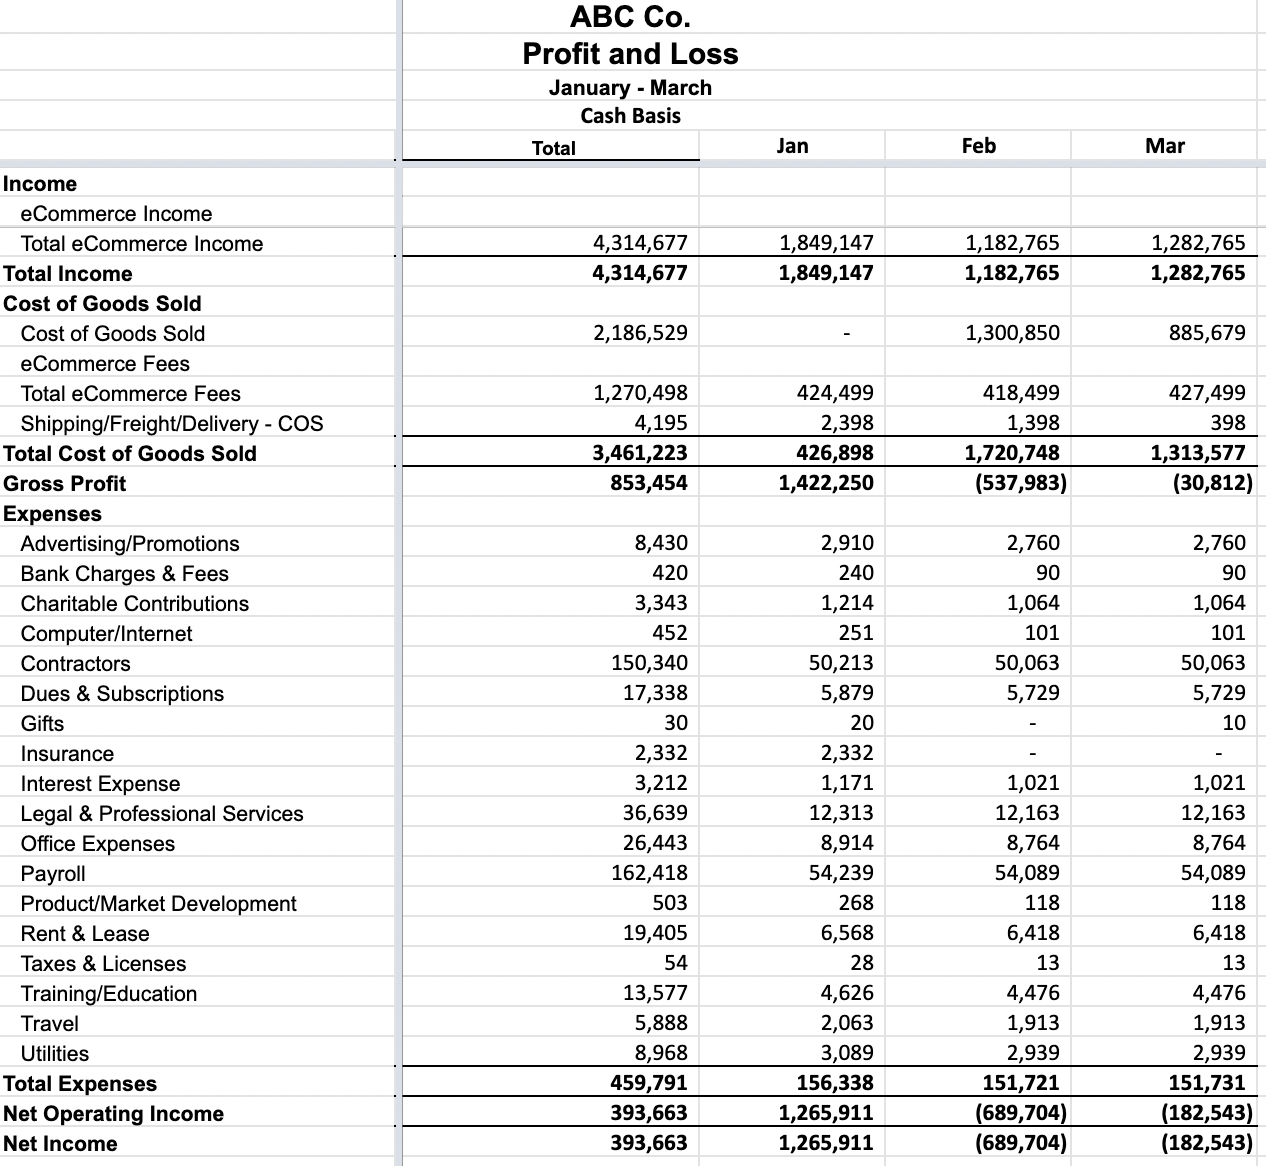 An example of a cash basis financial statement